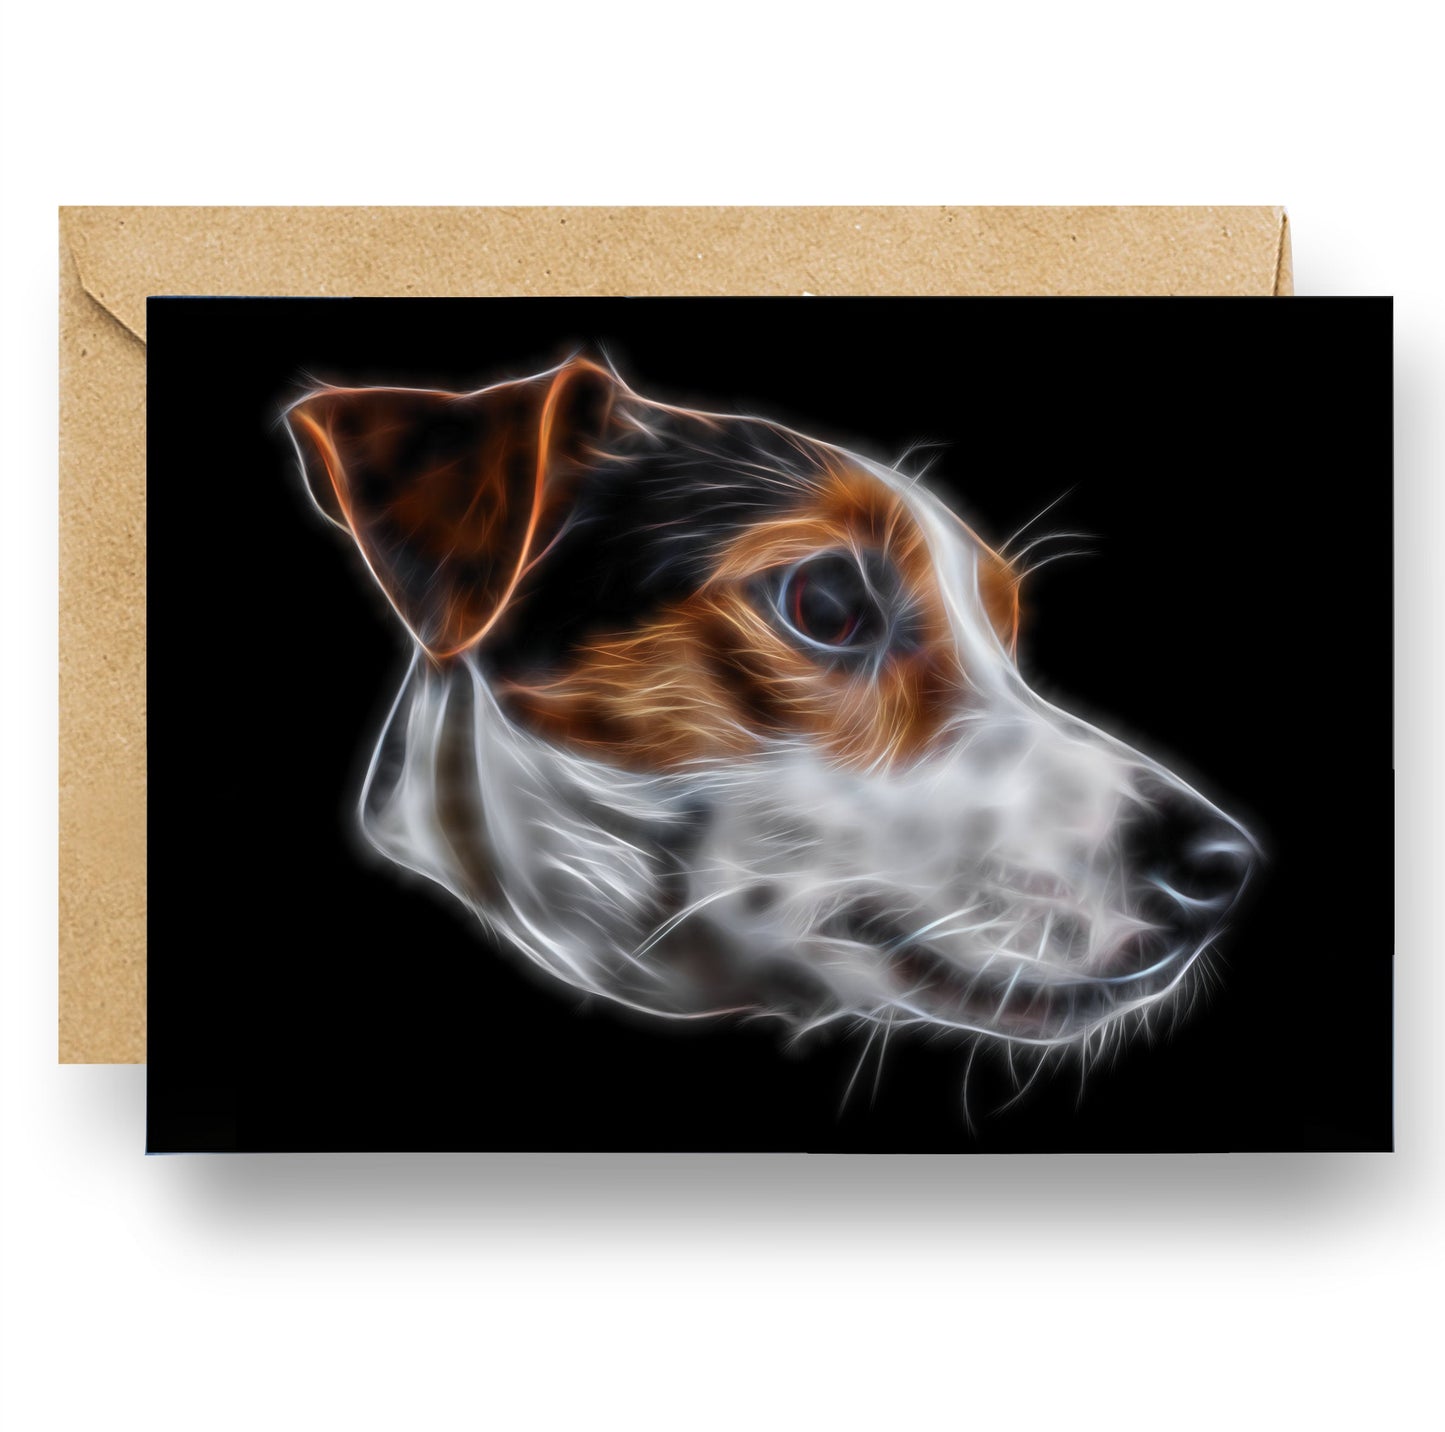 Jack Russell Blank Birthday Greeting Card with Stunning Fractal Art Design #1-1